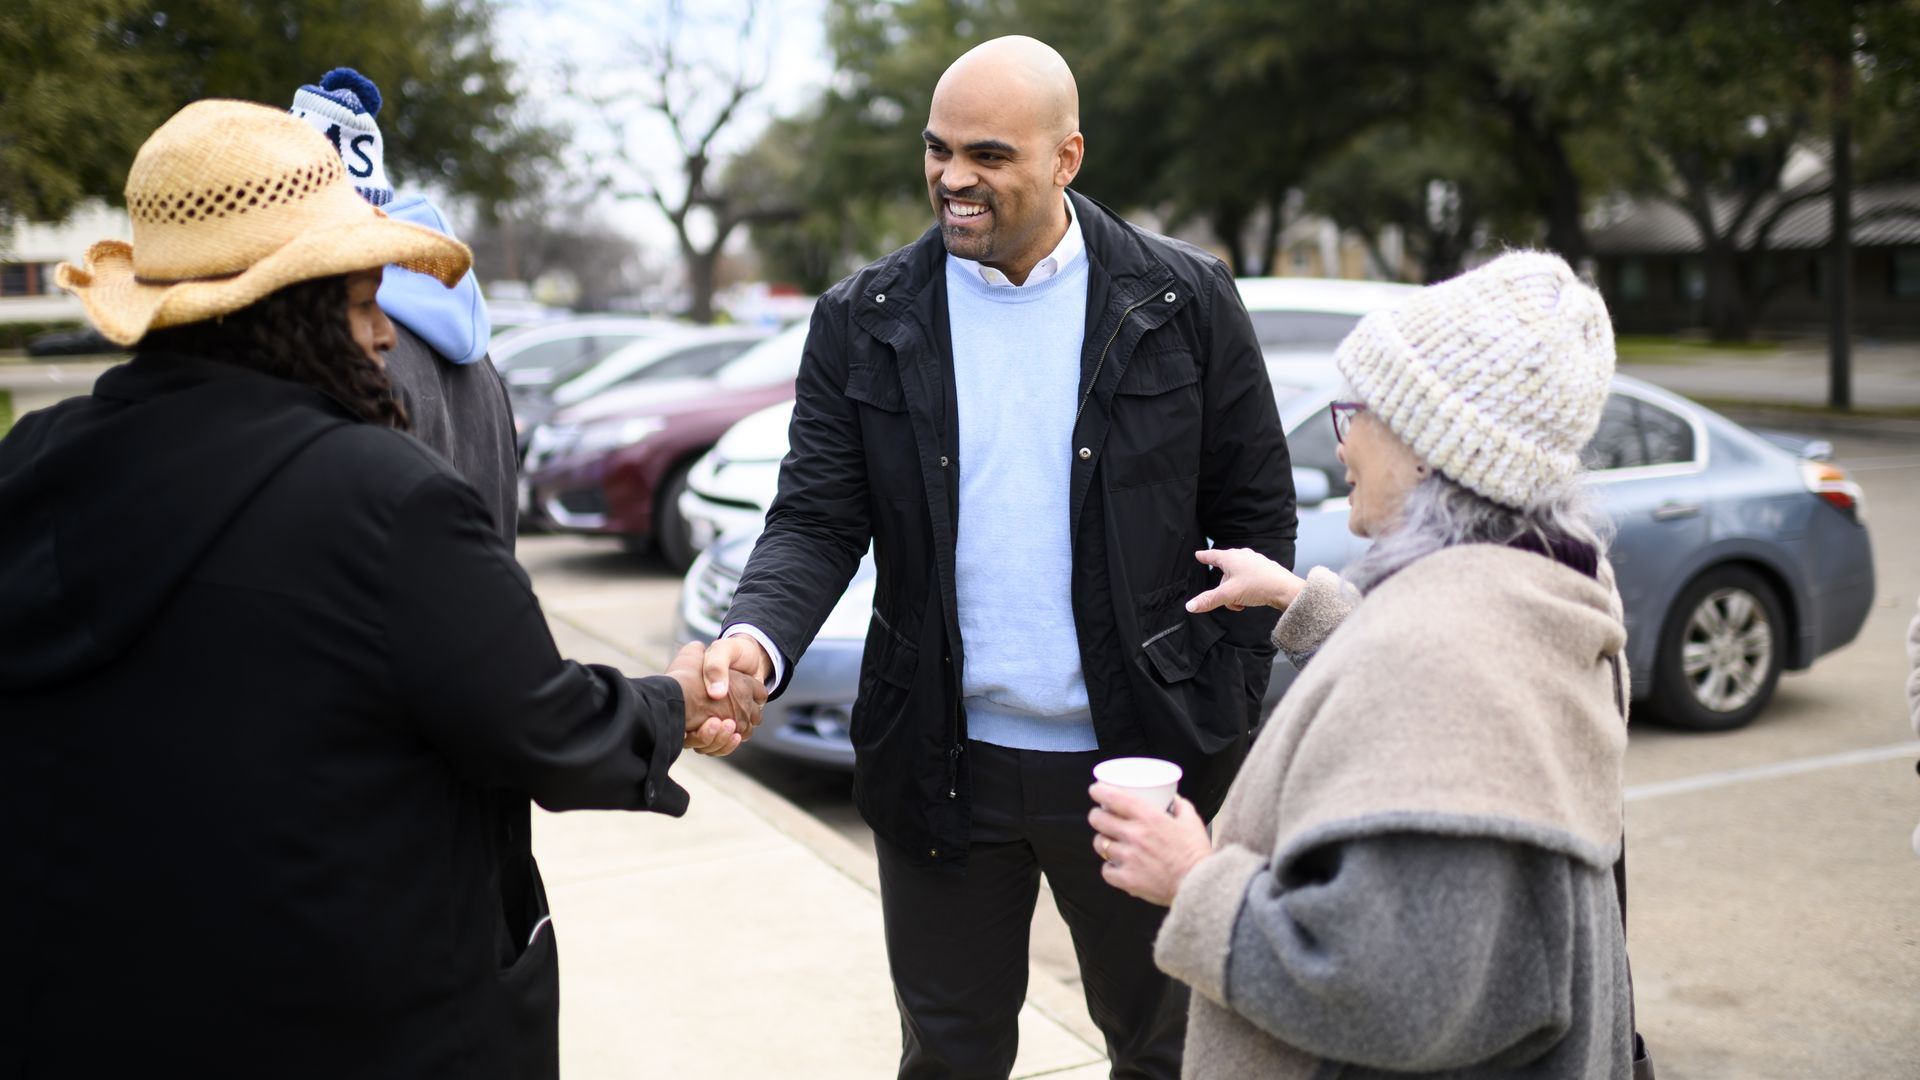 An image of Colin Allred shaking prospective voters' hands.